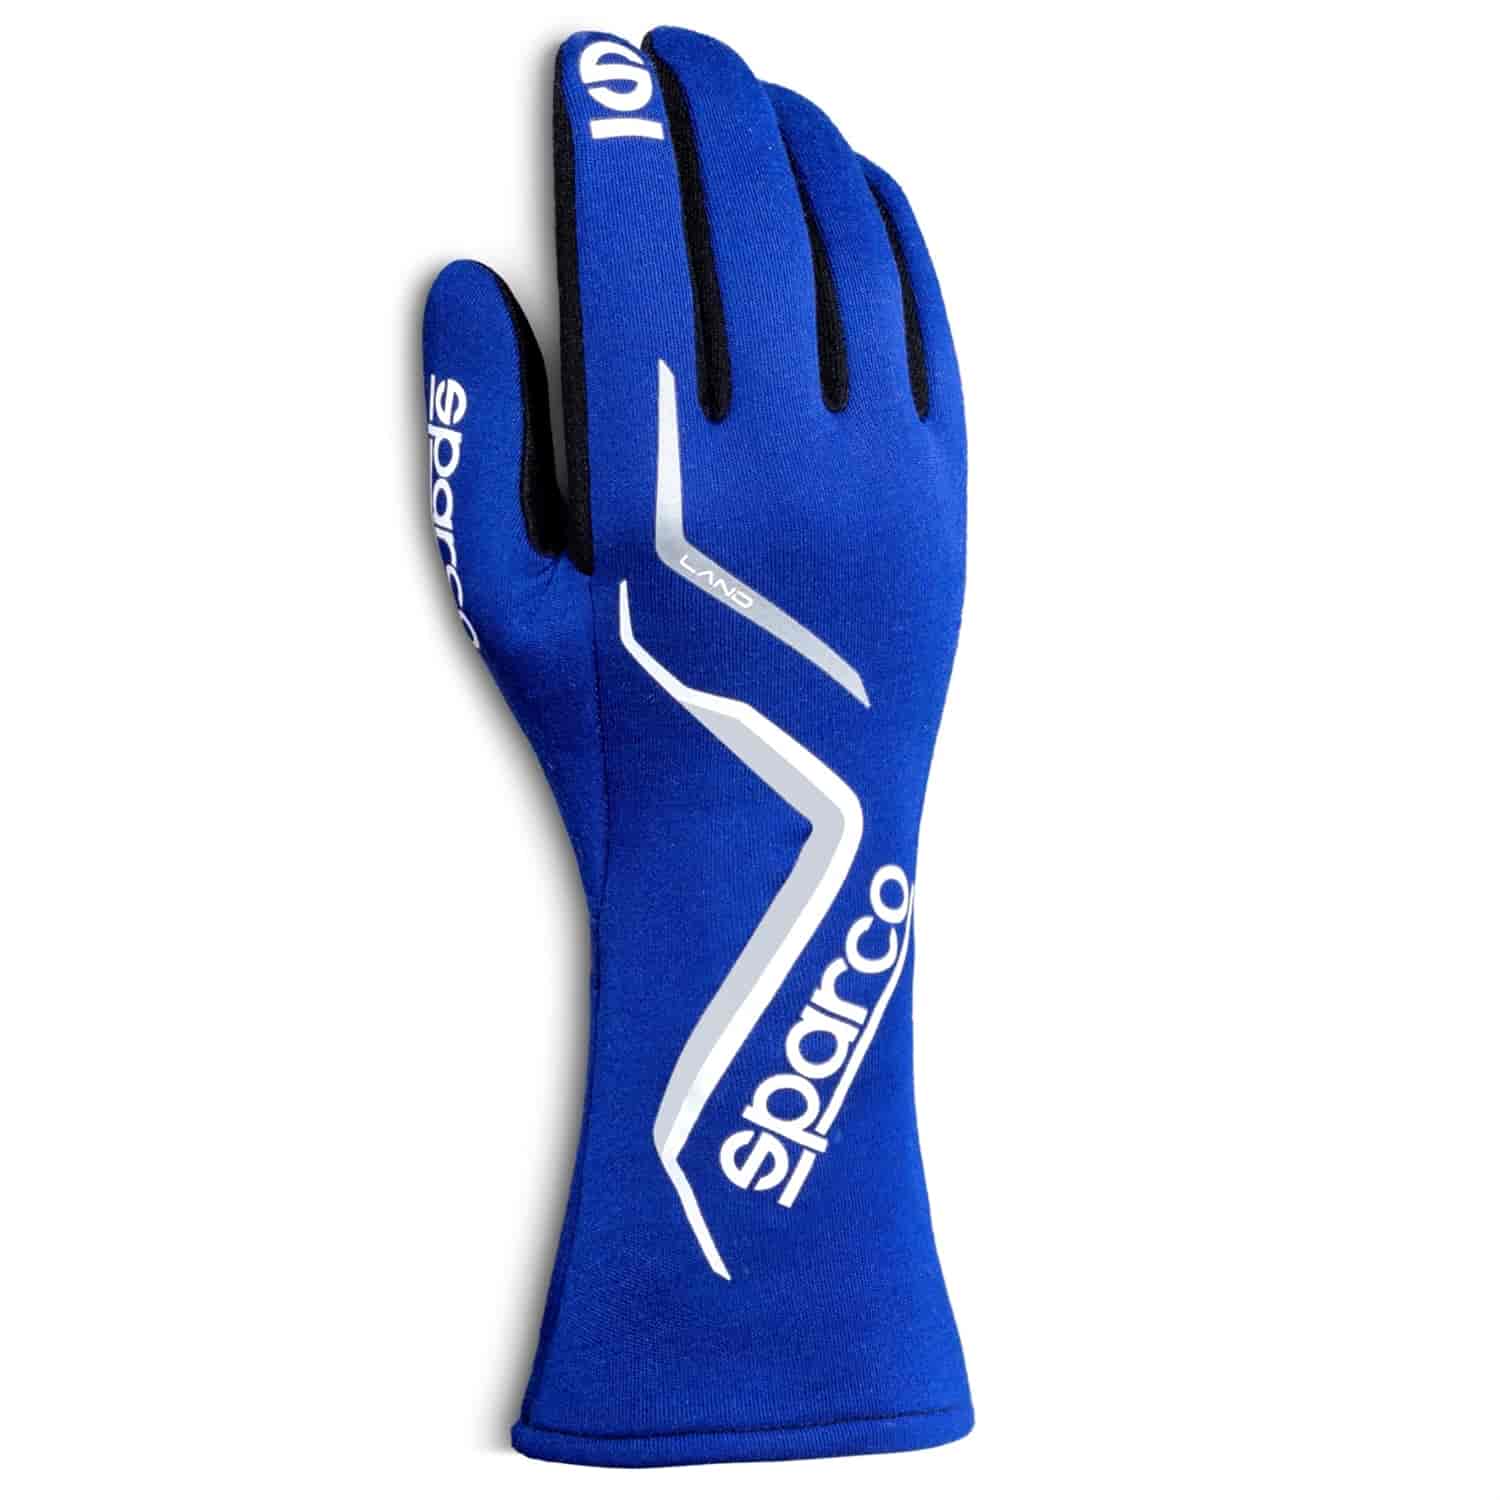 Sparco Land Gloves